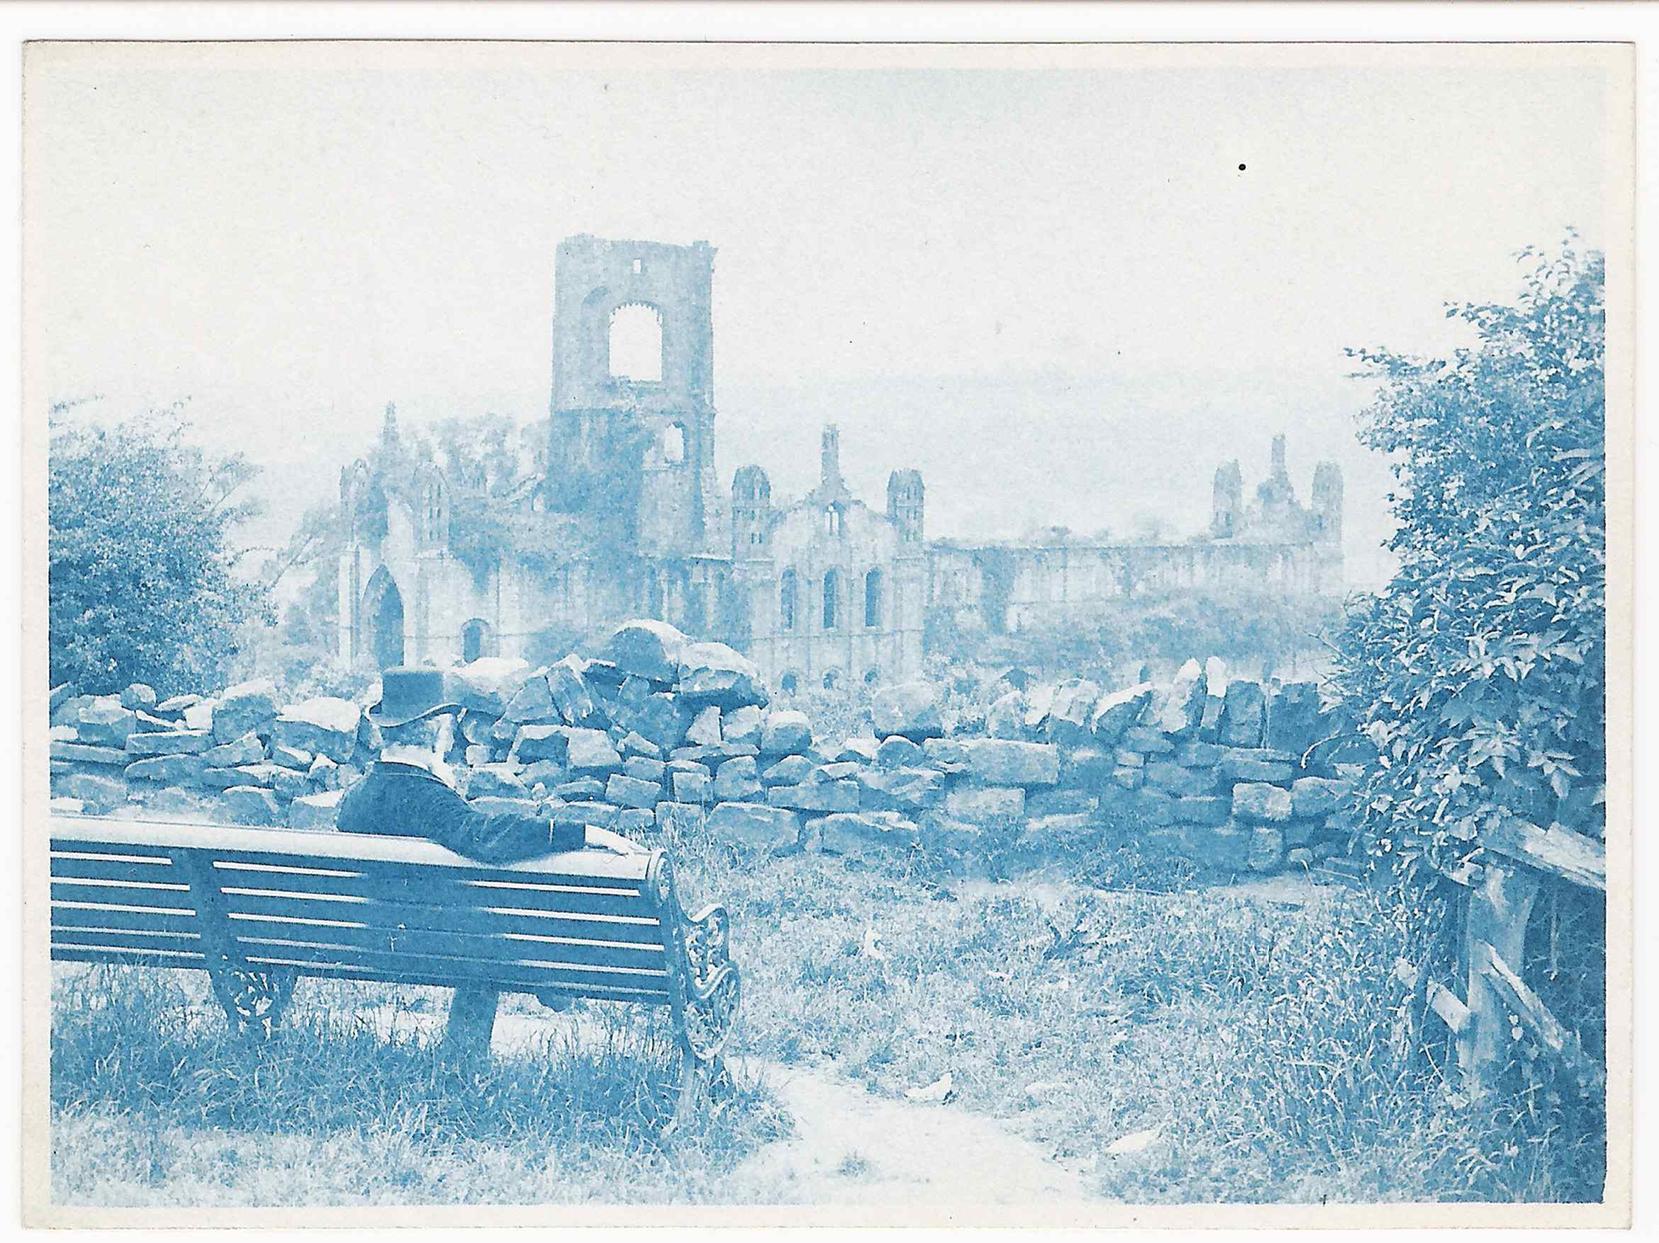 Inventor Washington Teasdale is thought to have taken one of the worlds first selfies in the ruins of Kirkstall Abbey. He captured the image in 1883, one of the earliest examples of someone both taking and appearing in a photo.